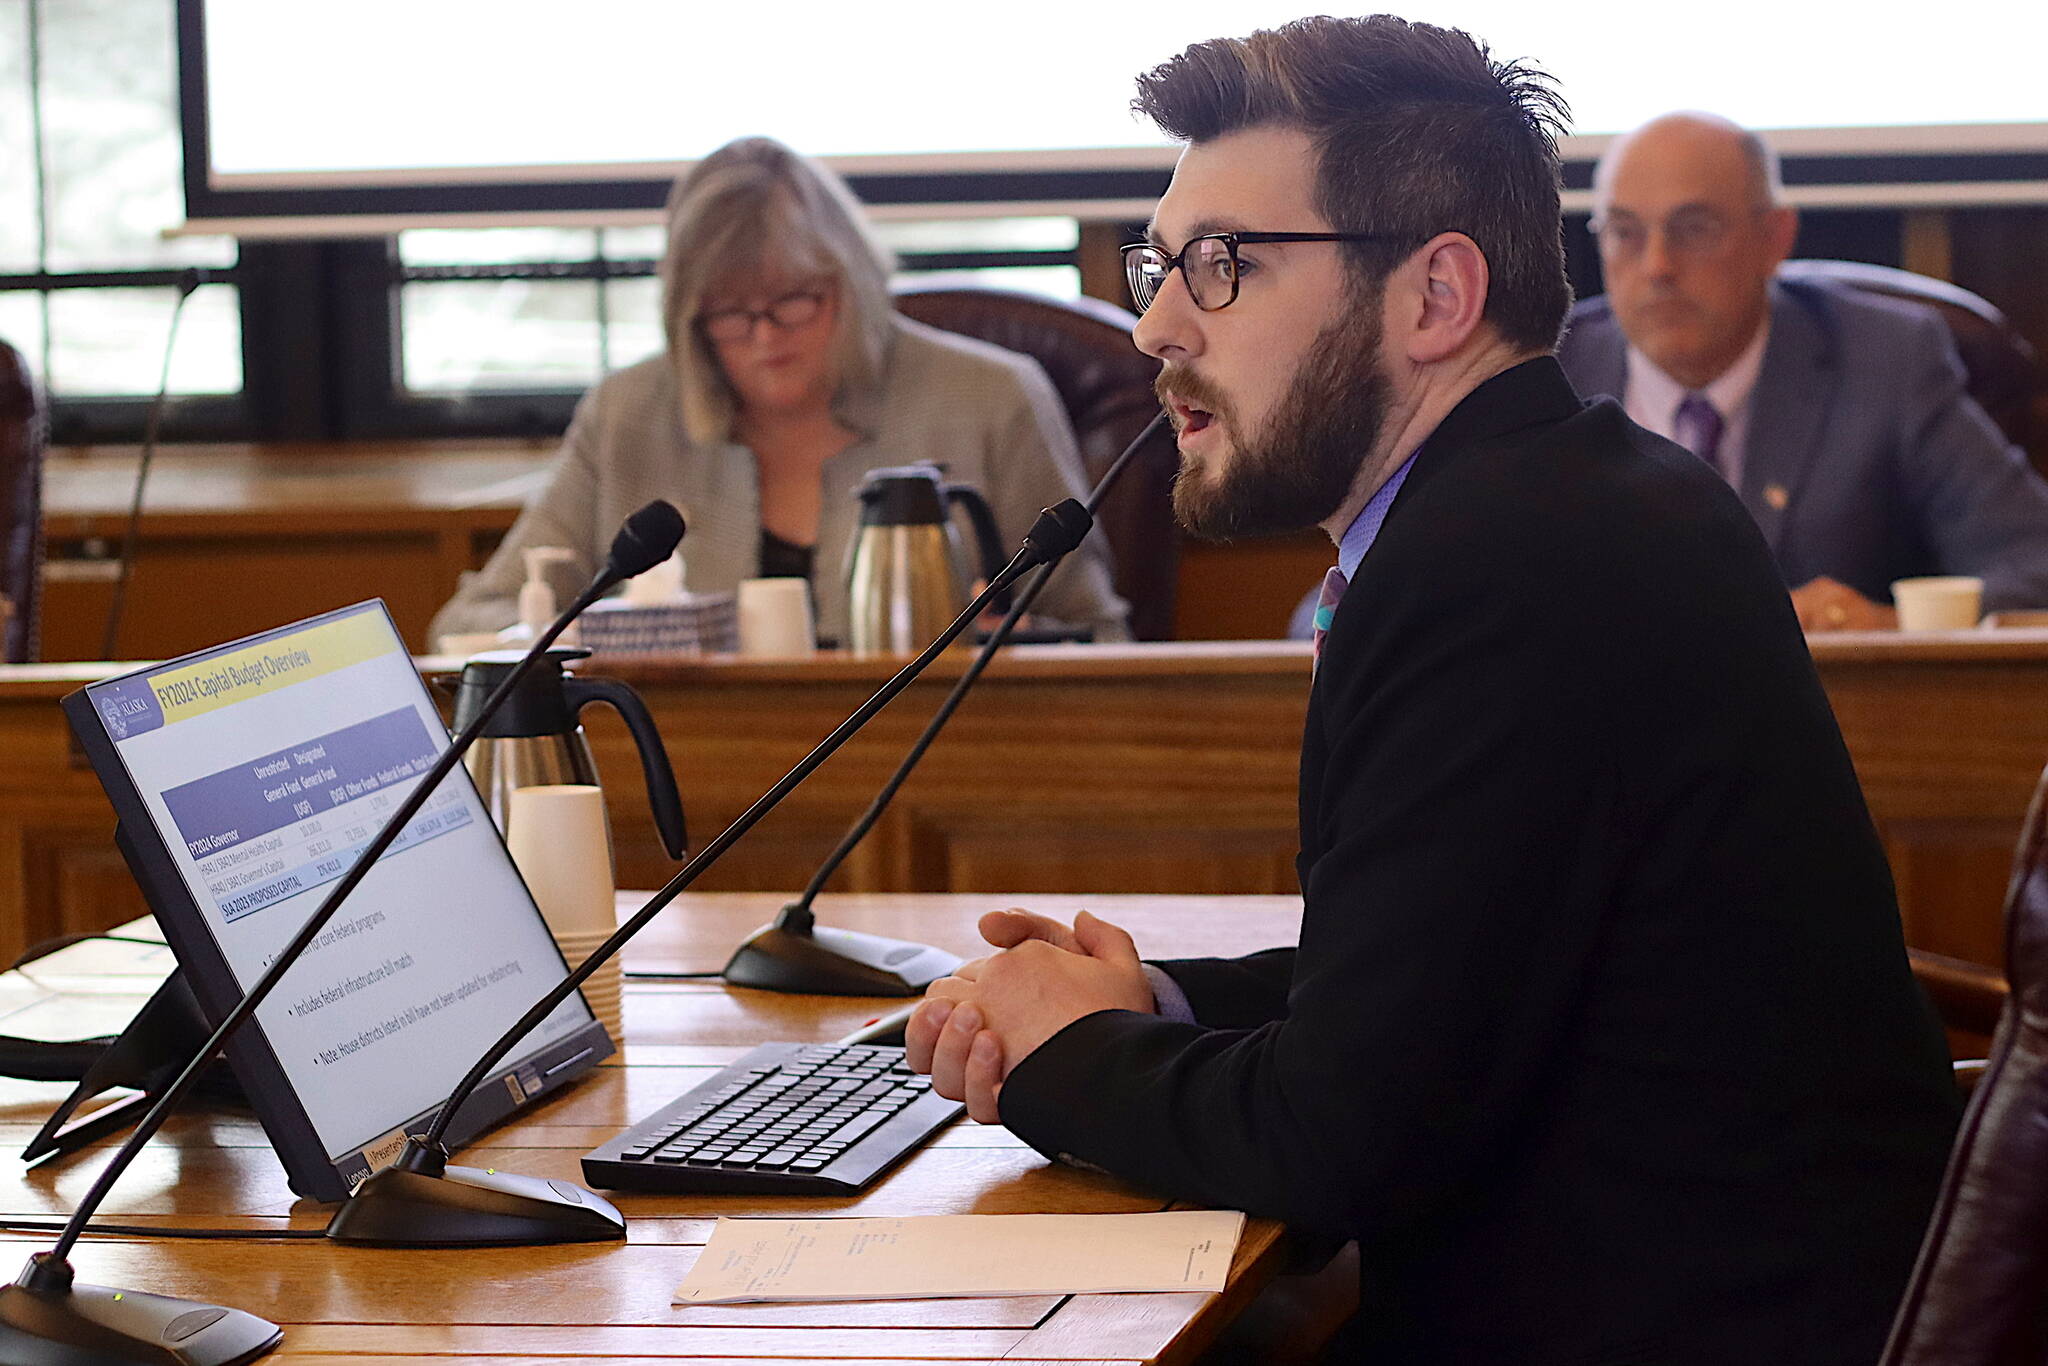 Neil Steininger, appointed director of the state Office of Management and Budget by Gov. Mike Dunleavy in 2020, testifies before the House Finance Committee at the Alaska State Capitol in January. (Mark Sabbatini / Juneau Empire)